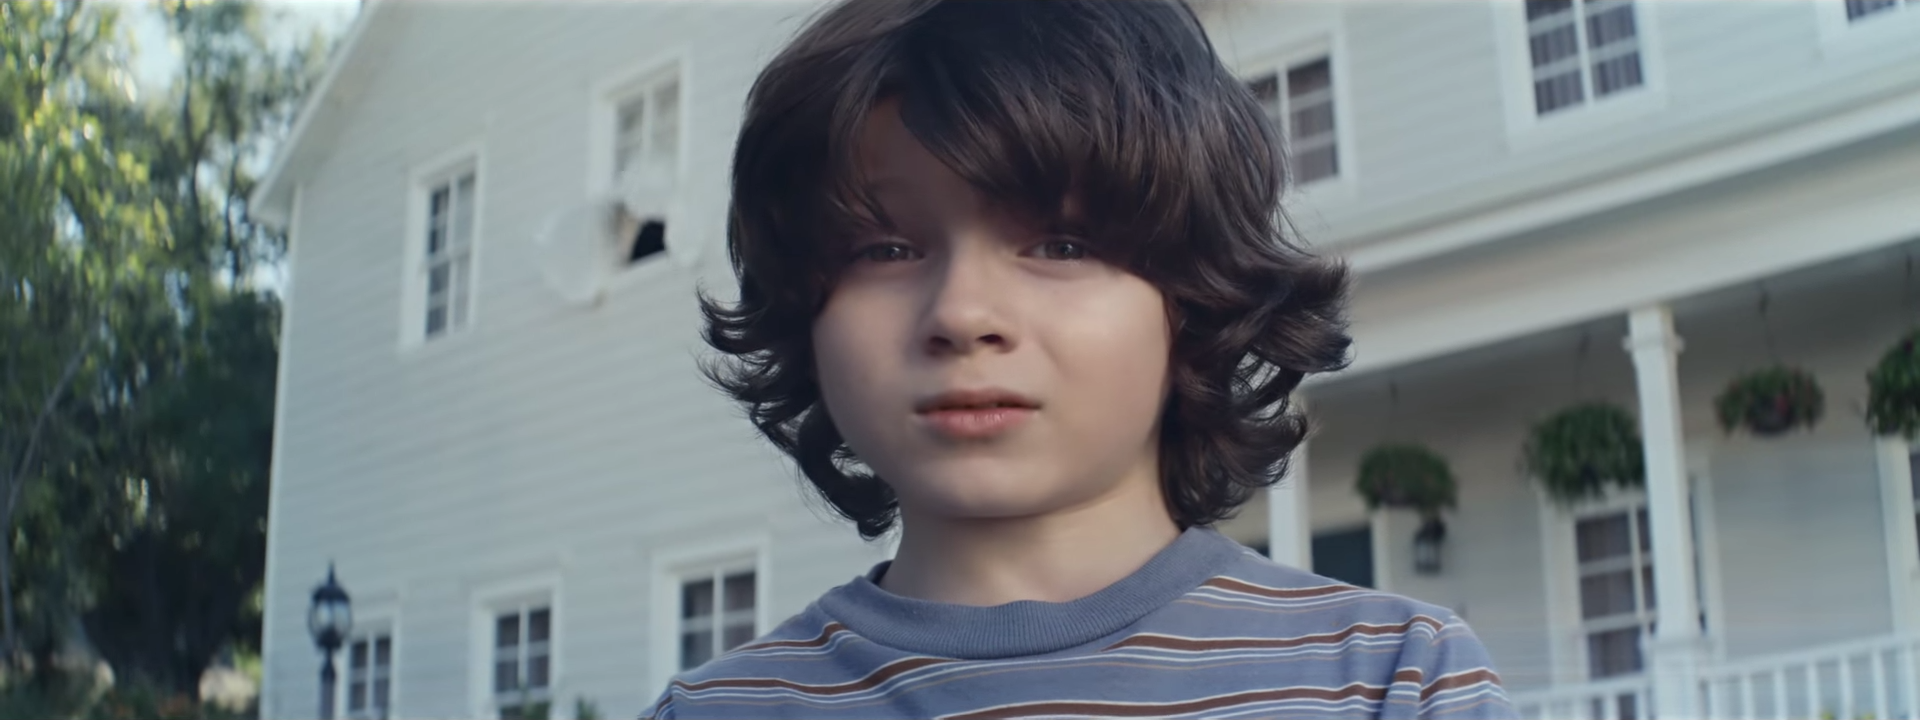 A Belated, Catty Analysis of Sunday’s Super Bowl Ads